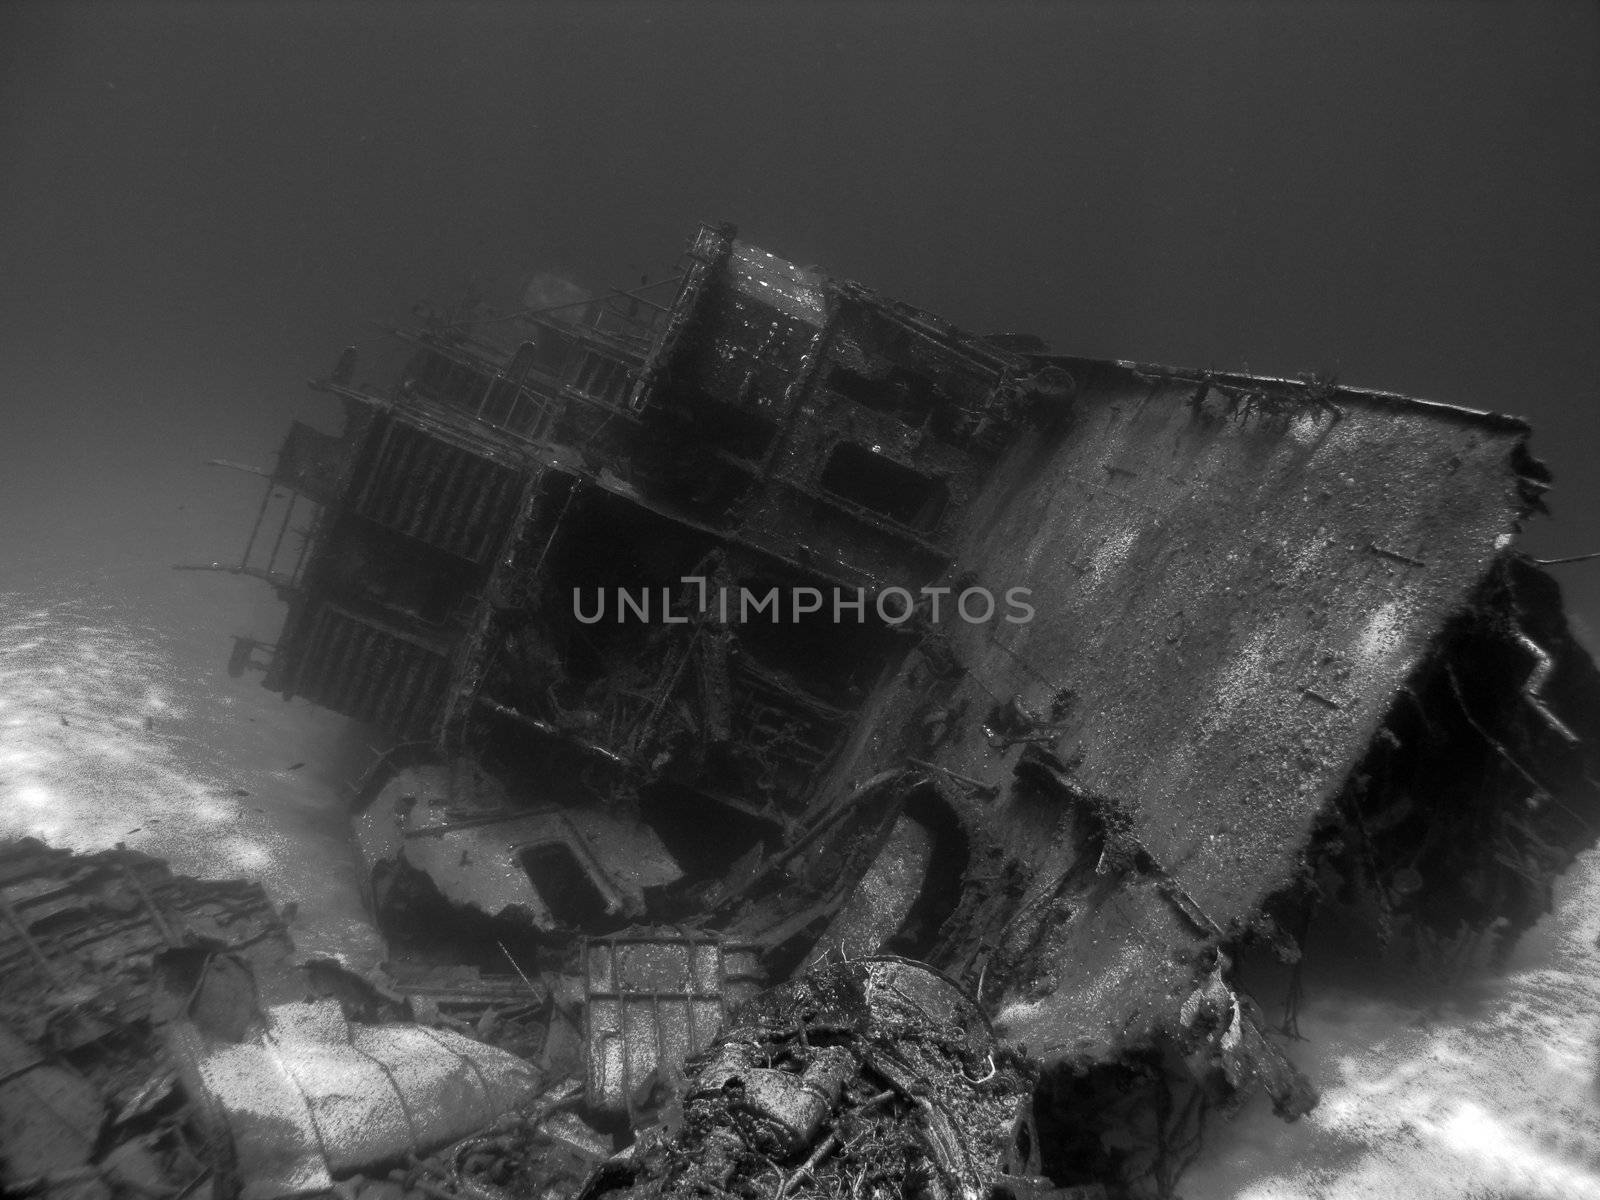 Black and White shot of an Underwater Shipwreck